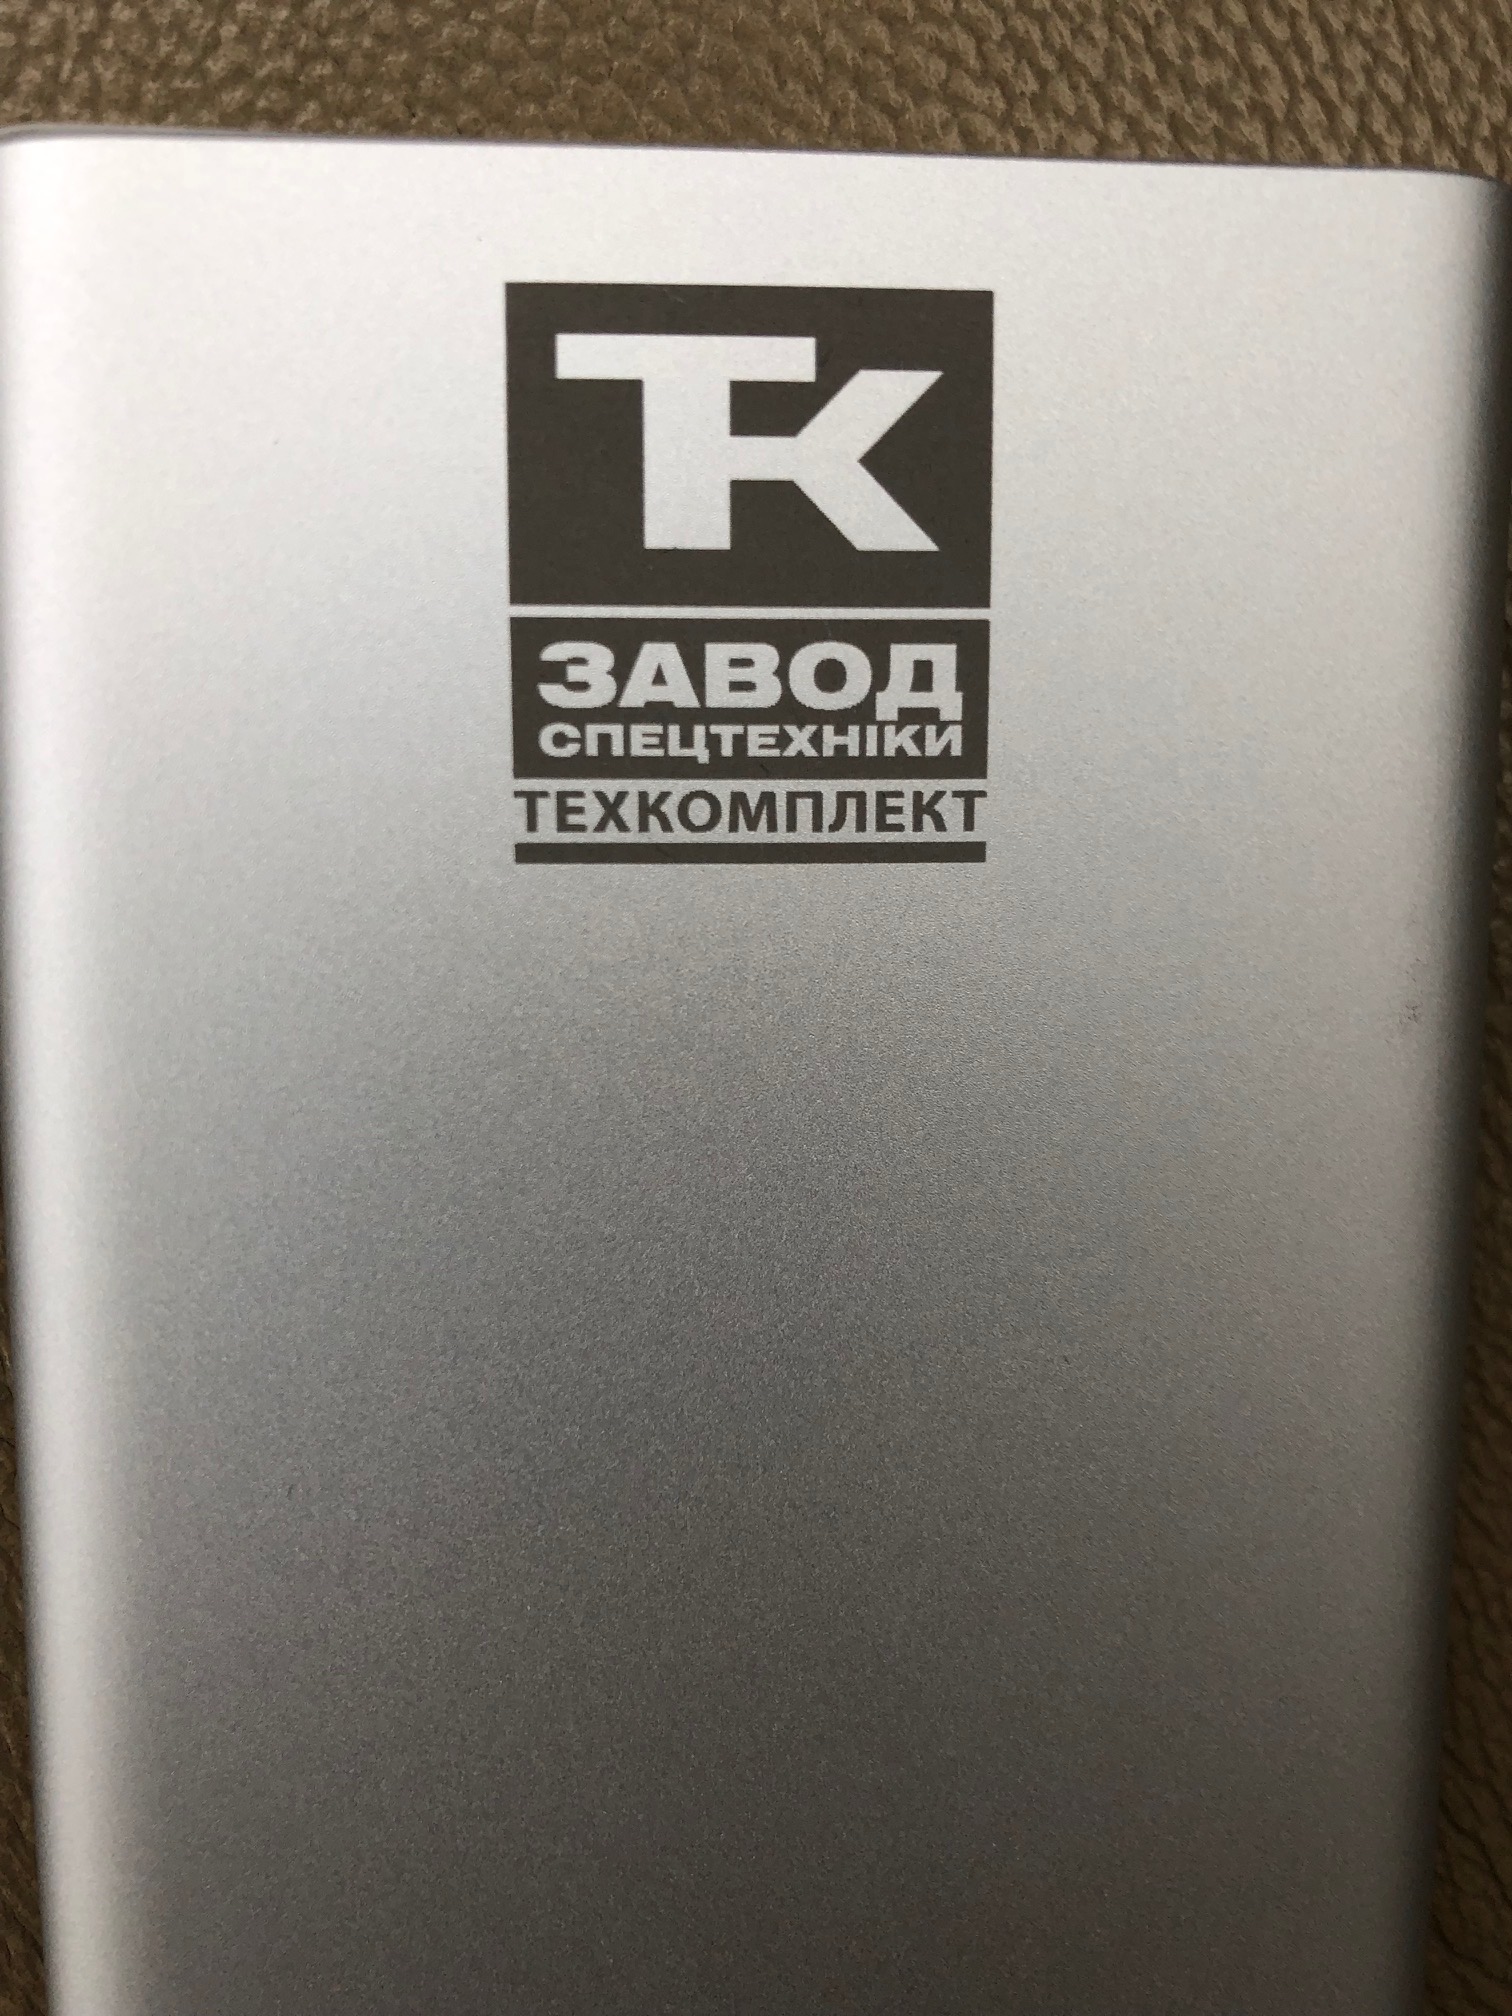 Power banks with LOGO